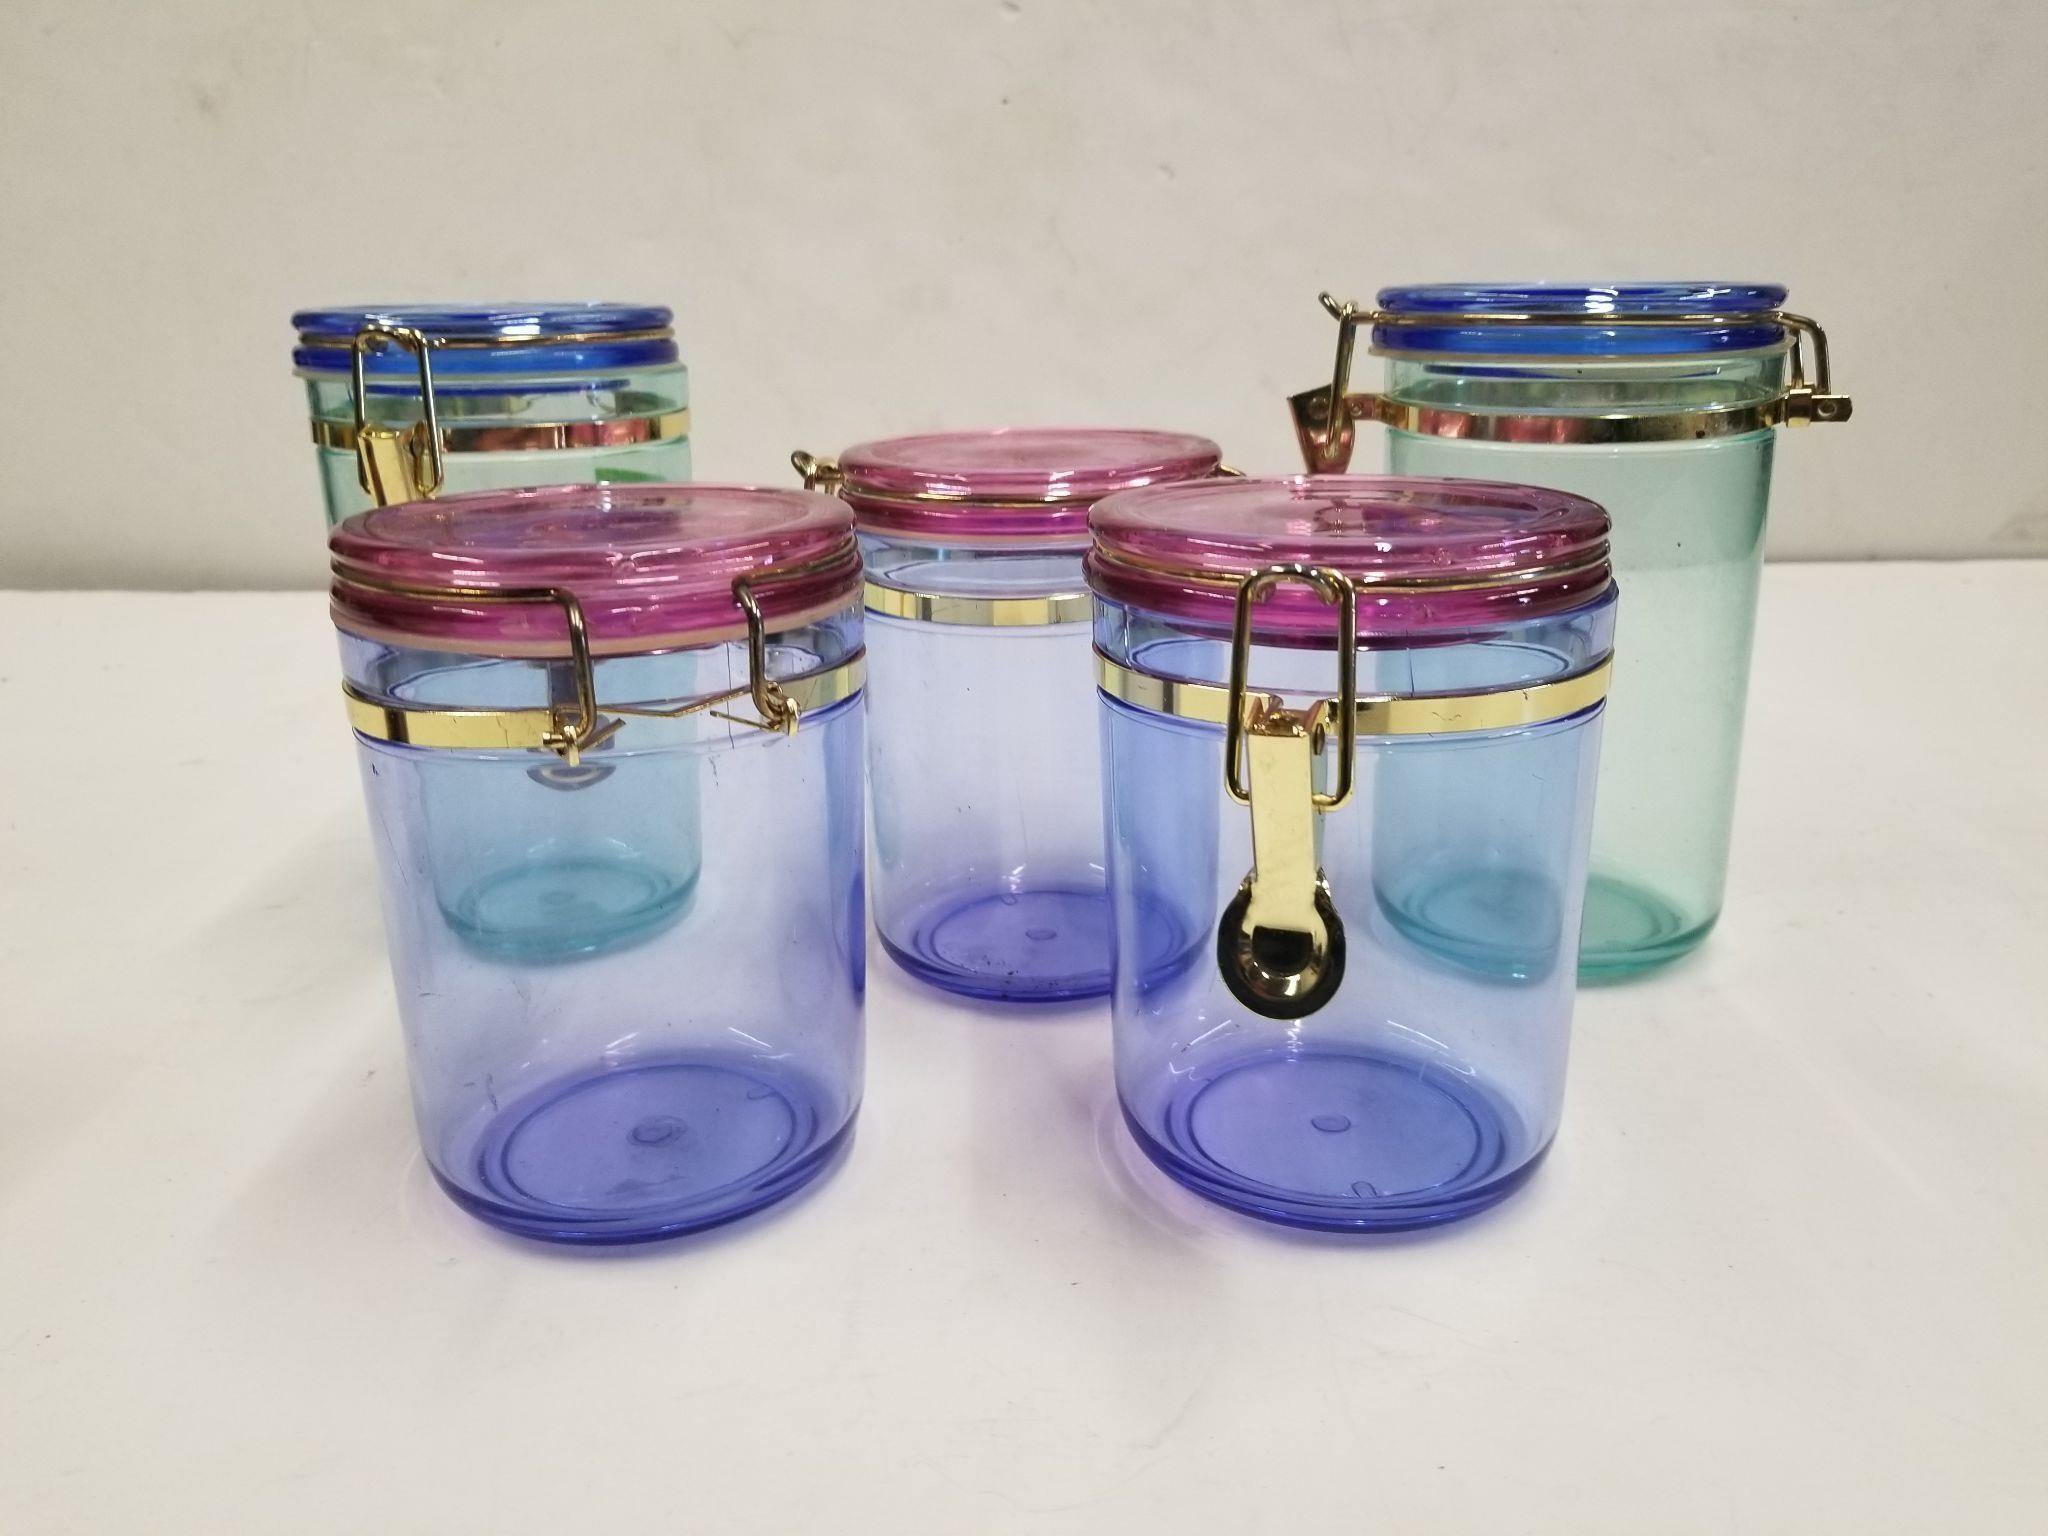 Five Plastic Food Canisters